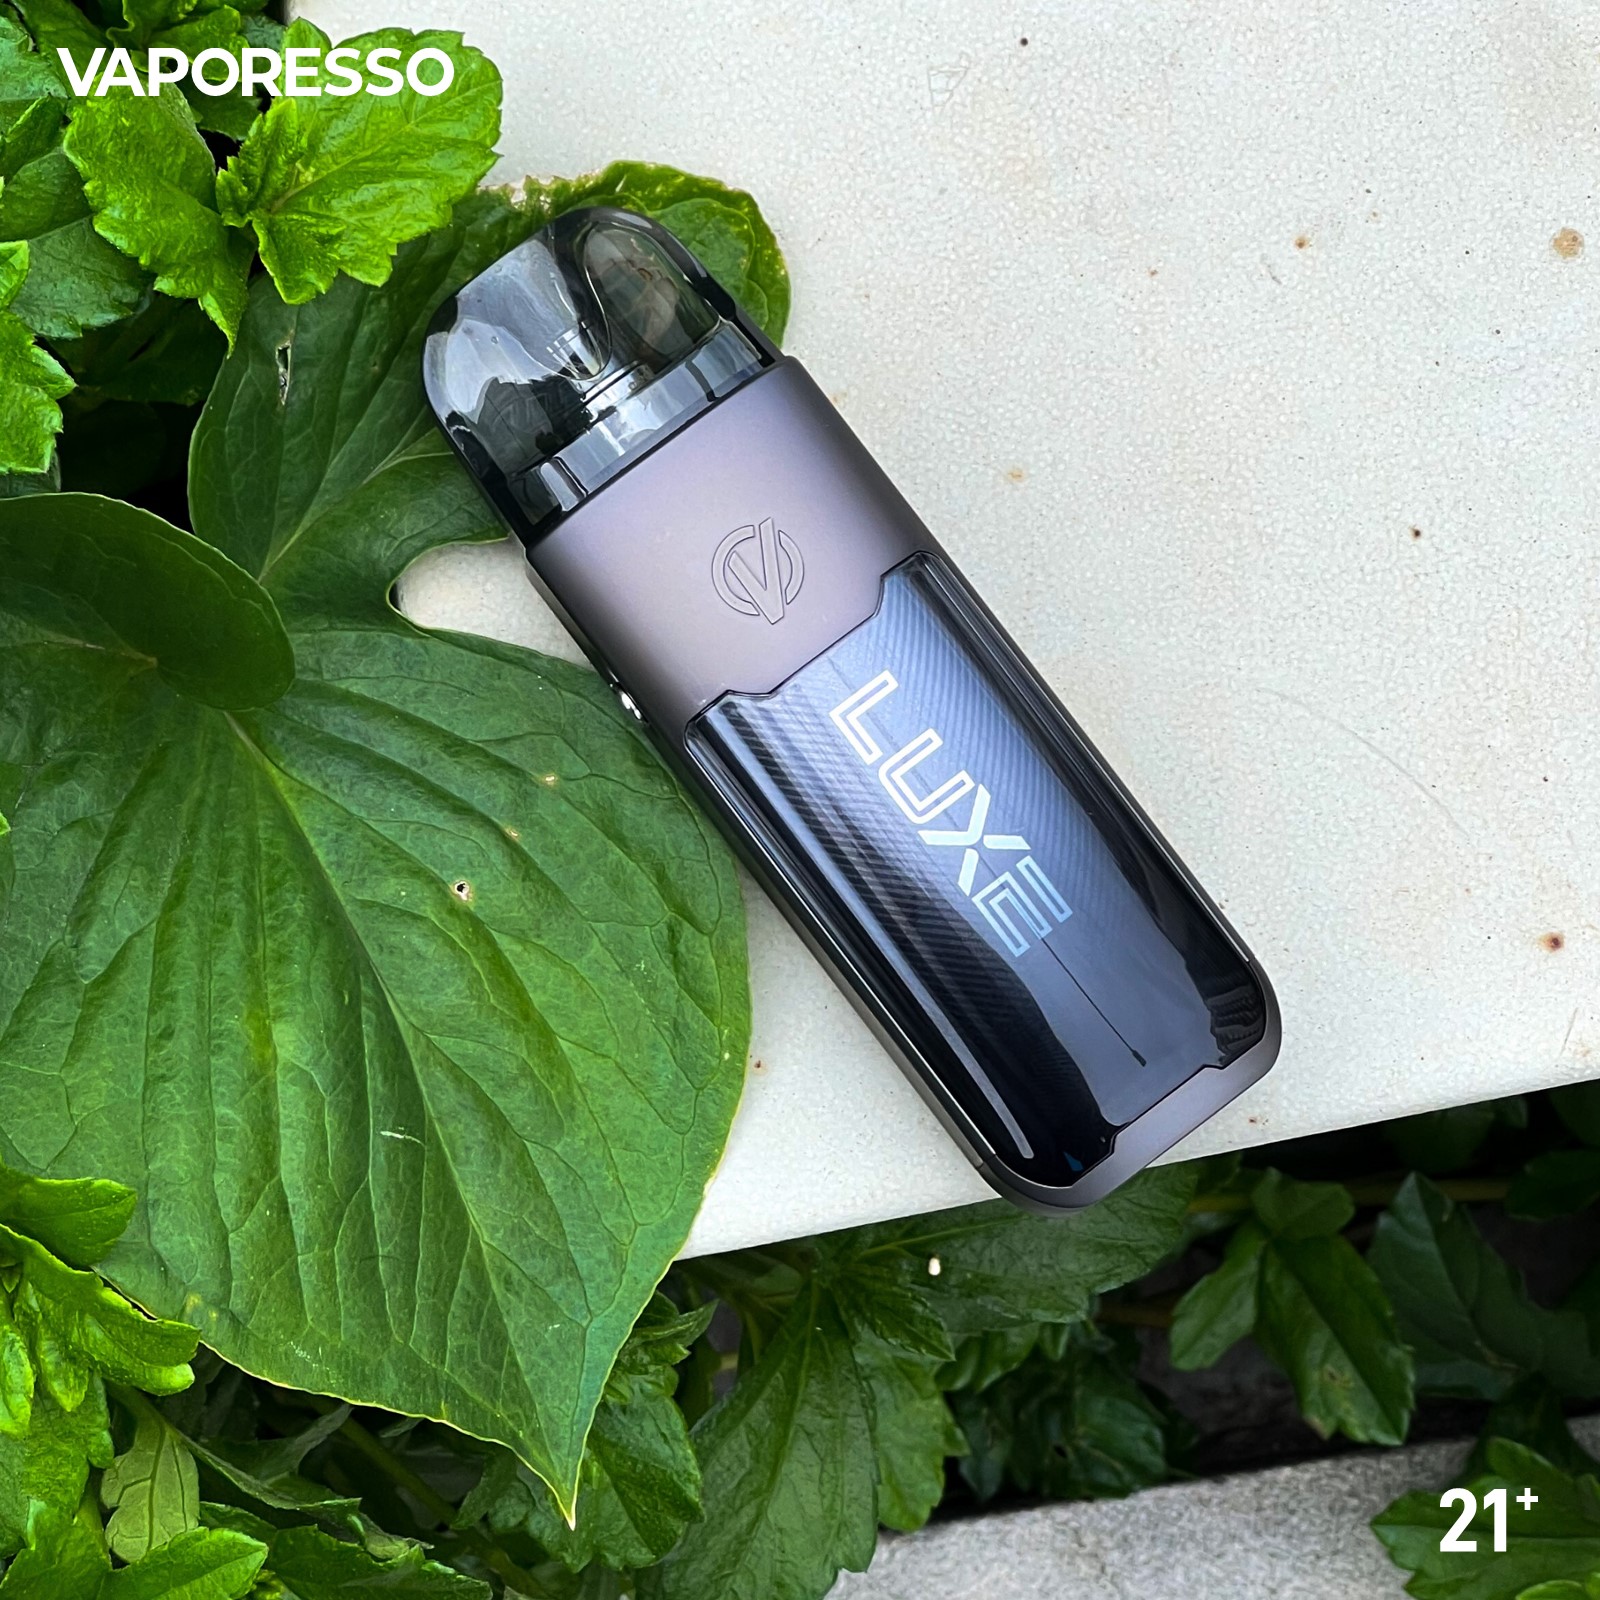 Vaporesso Vaping Odyssey: A User’s Adventure in Flavorful Clouds”